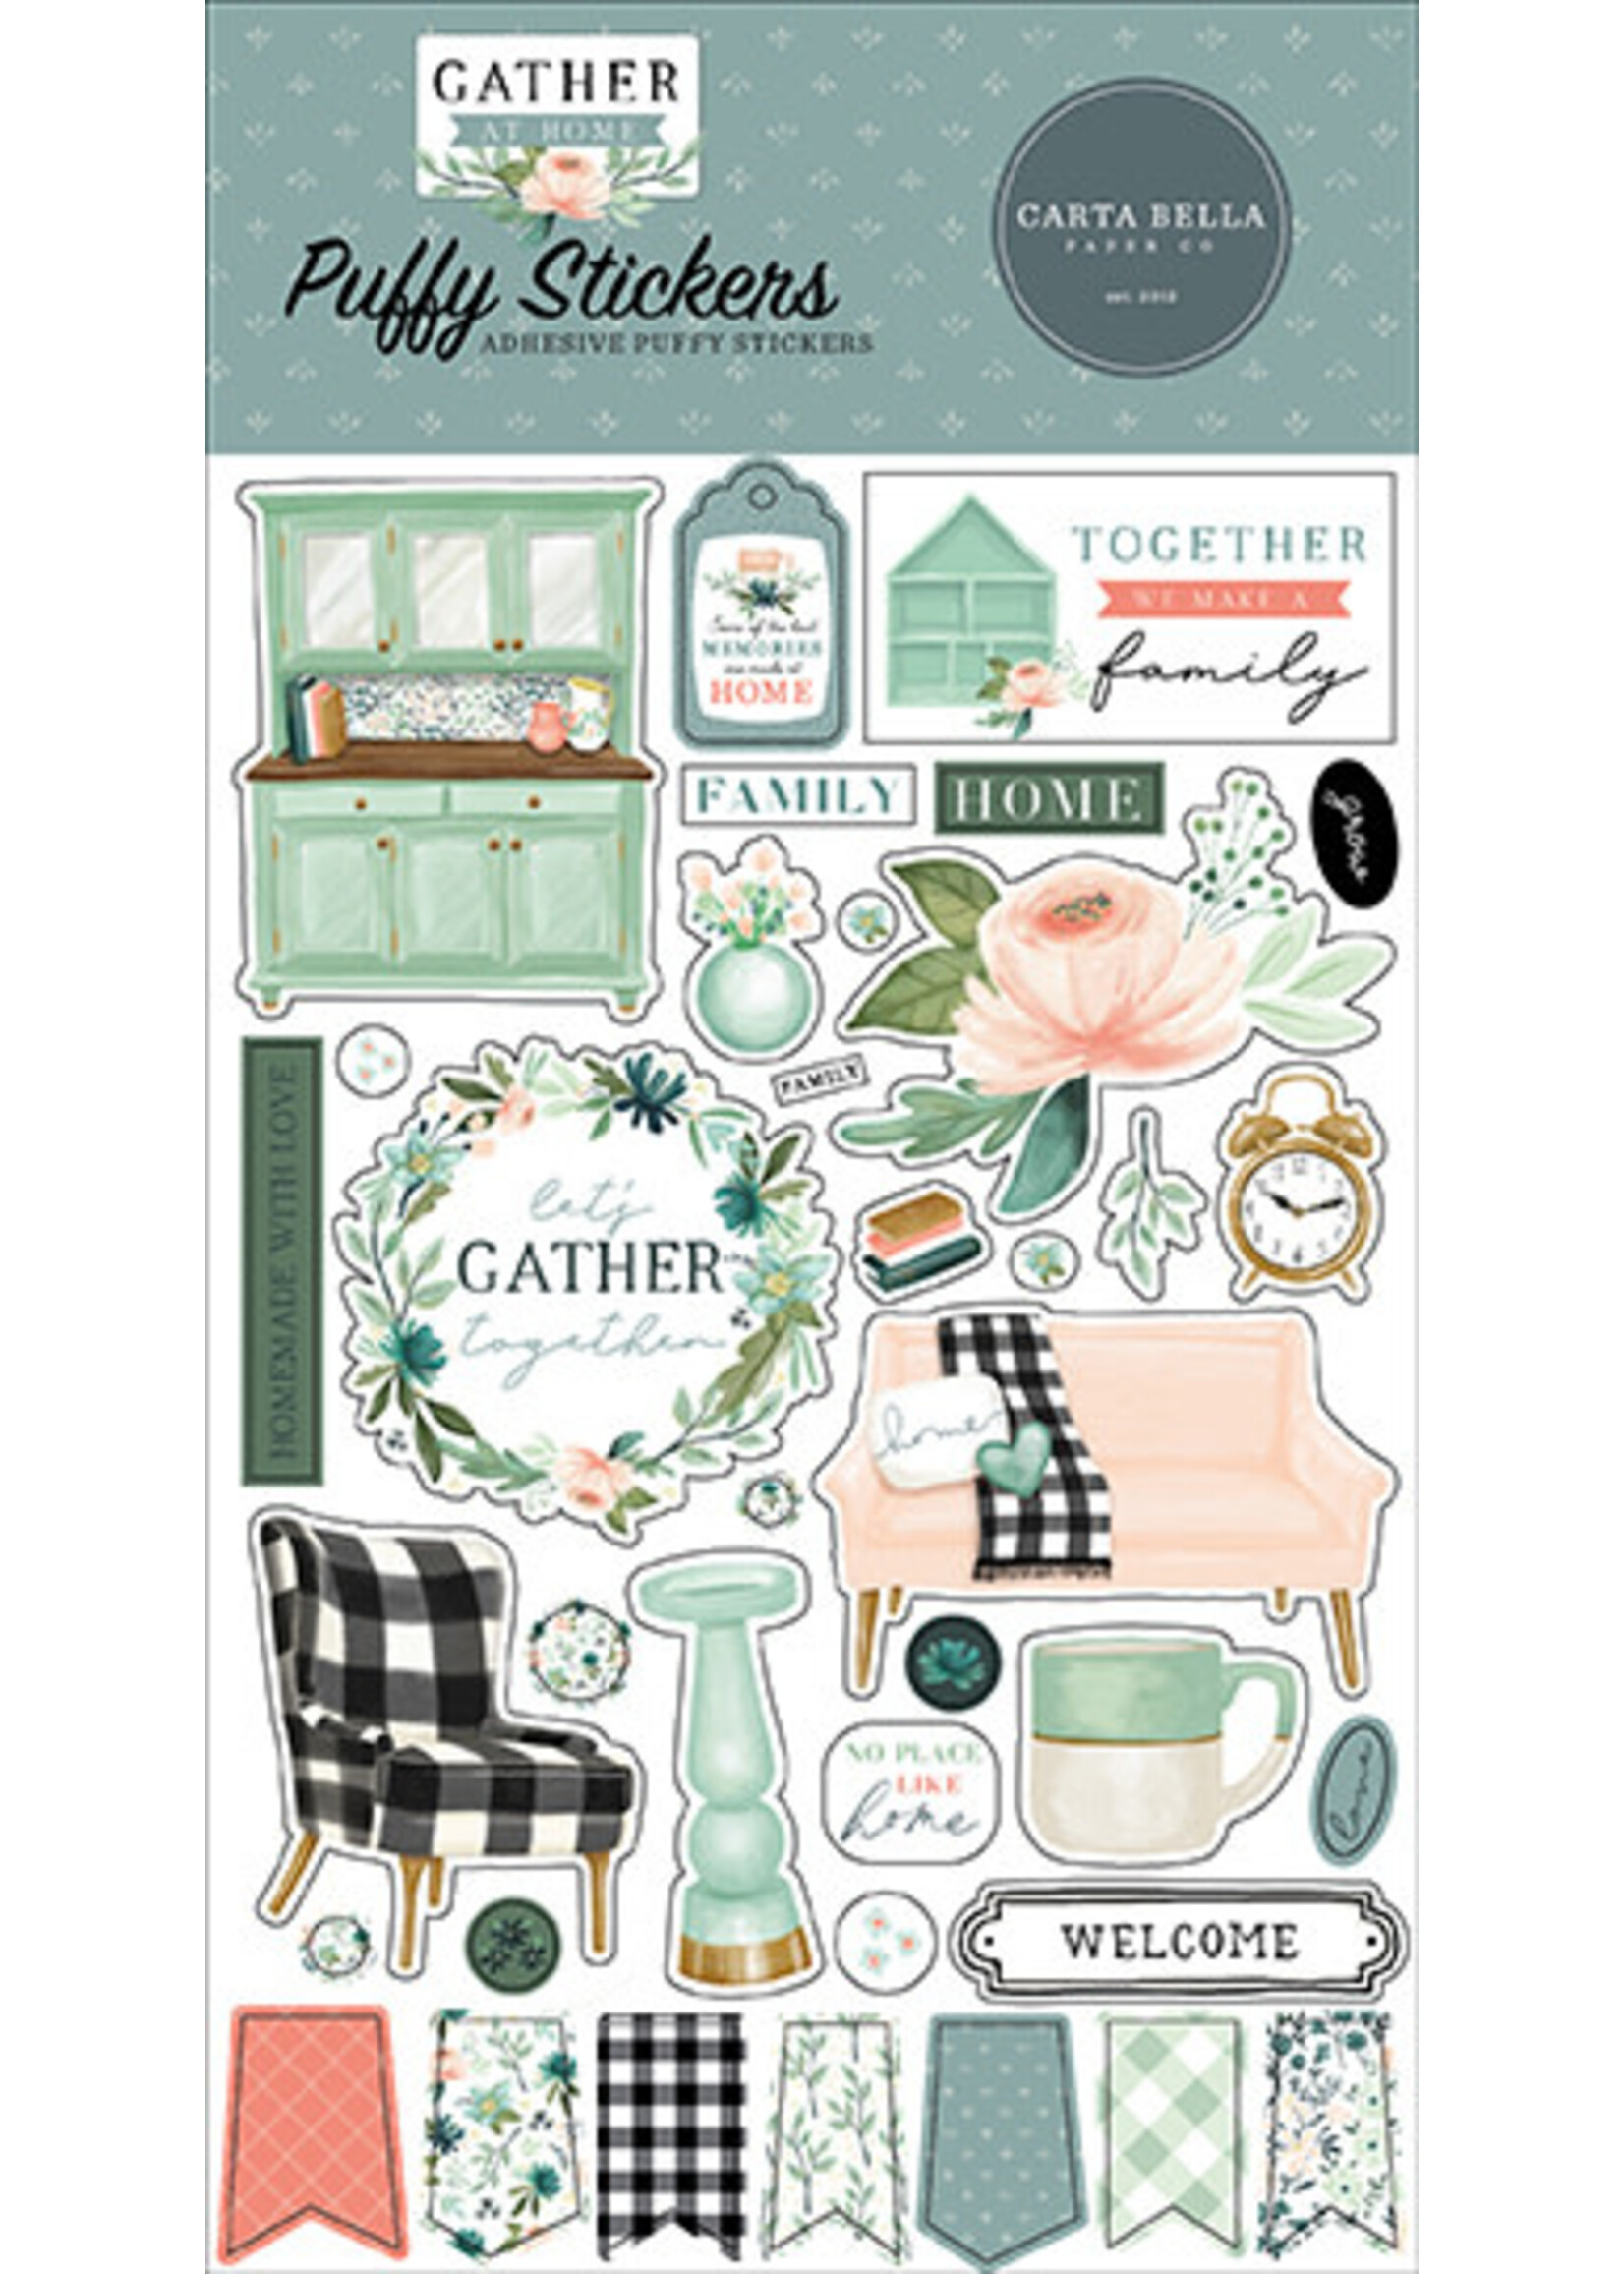 Carta Bella Gather At Home: Puffy Stickers